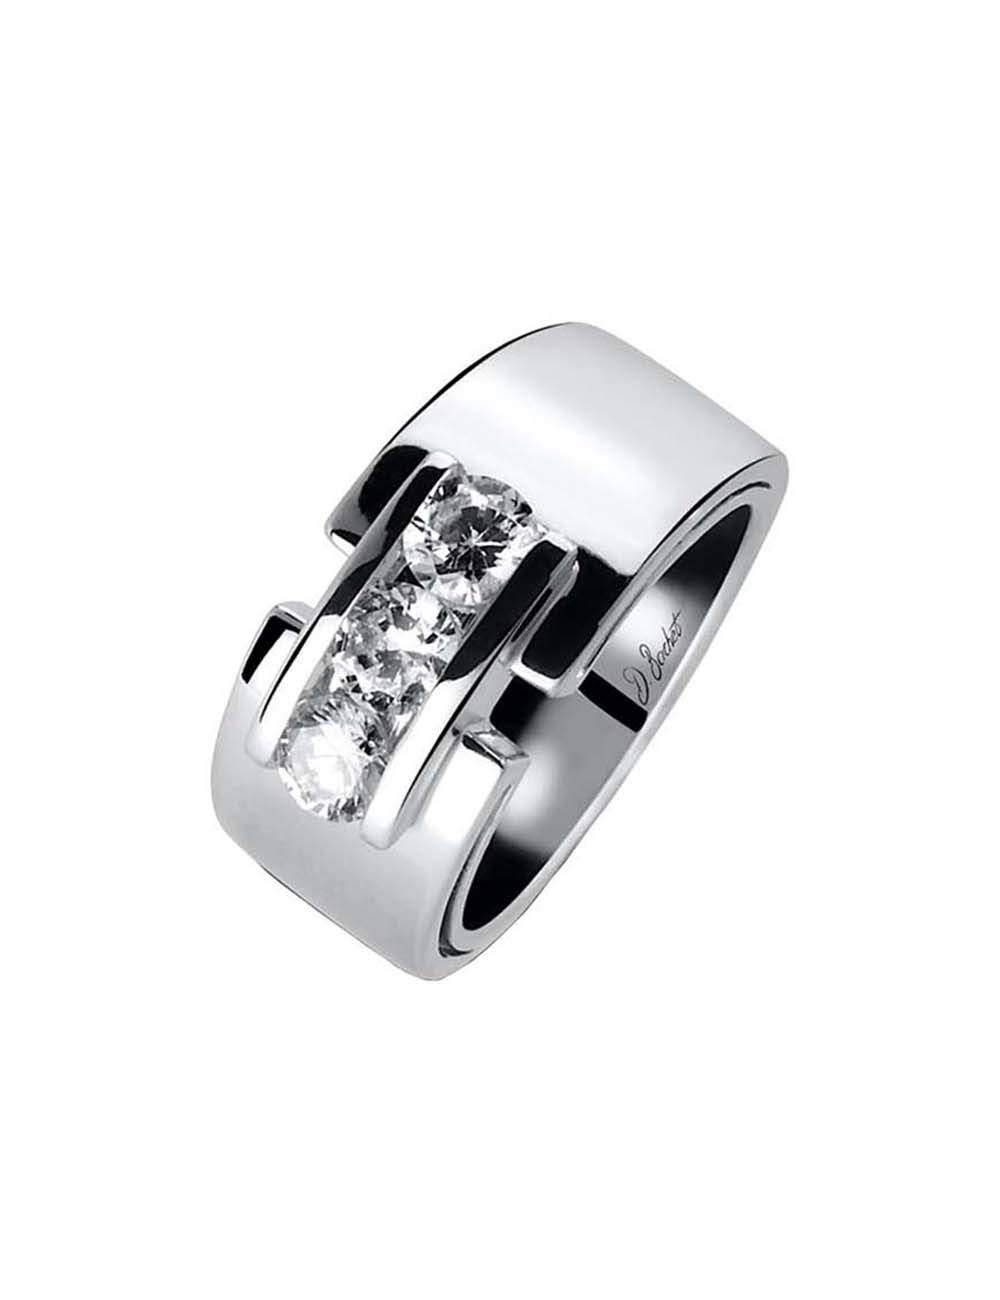 Luxury ring with 3 natural 0.30 ct diamonds in platinum, ethical, gold options available.